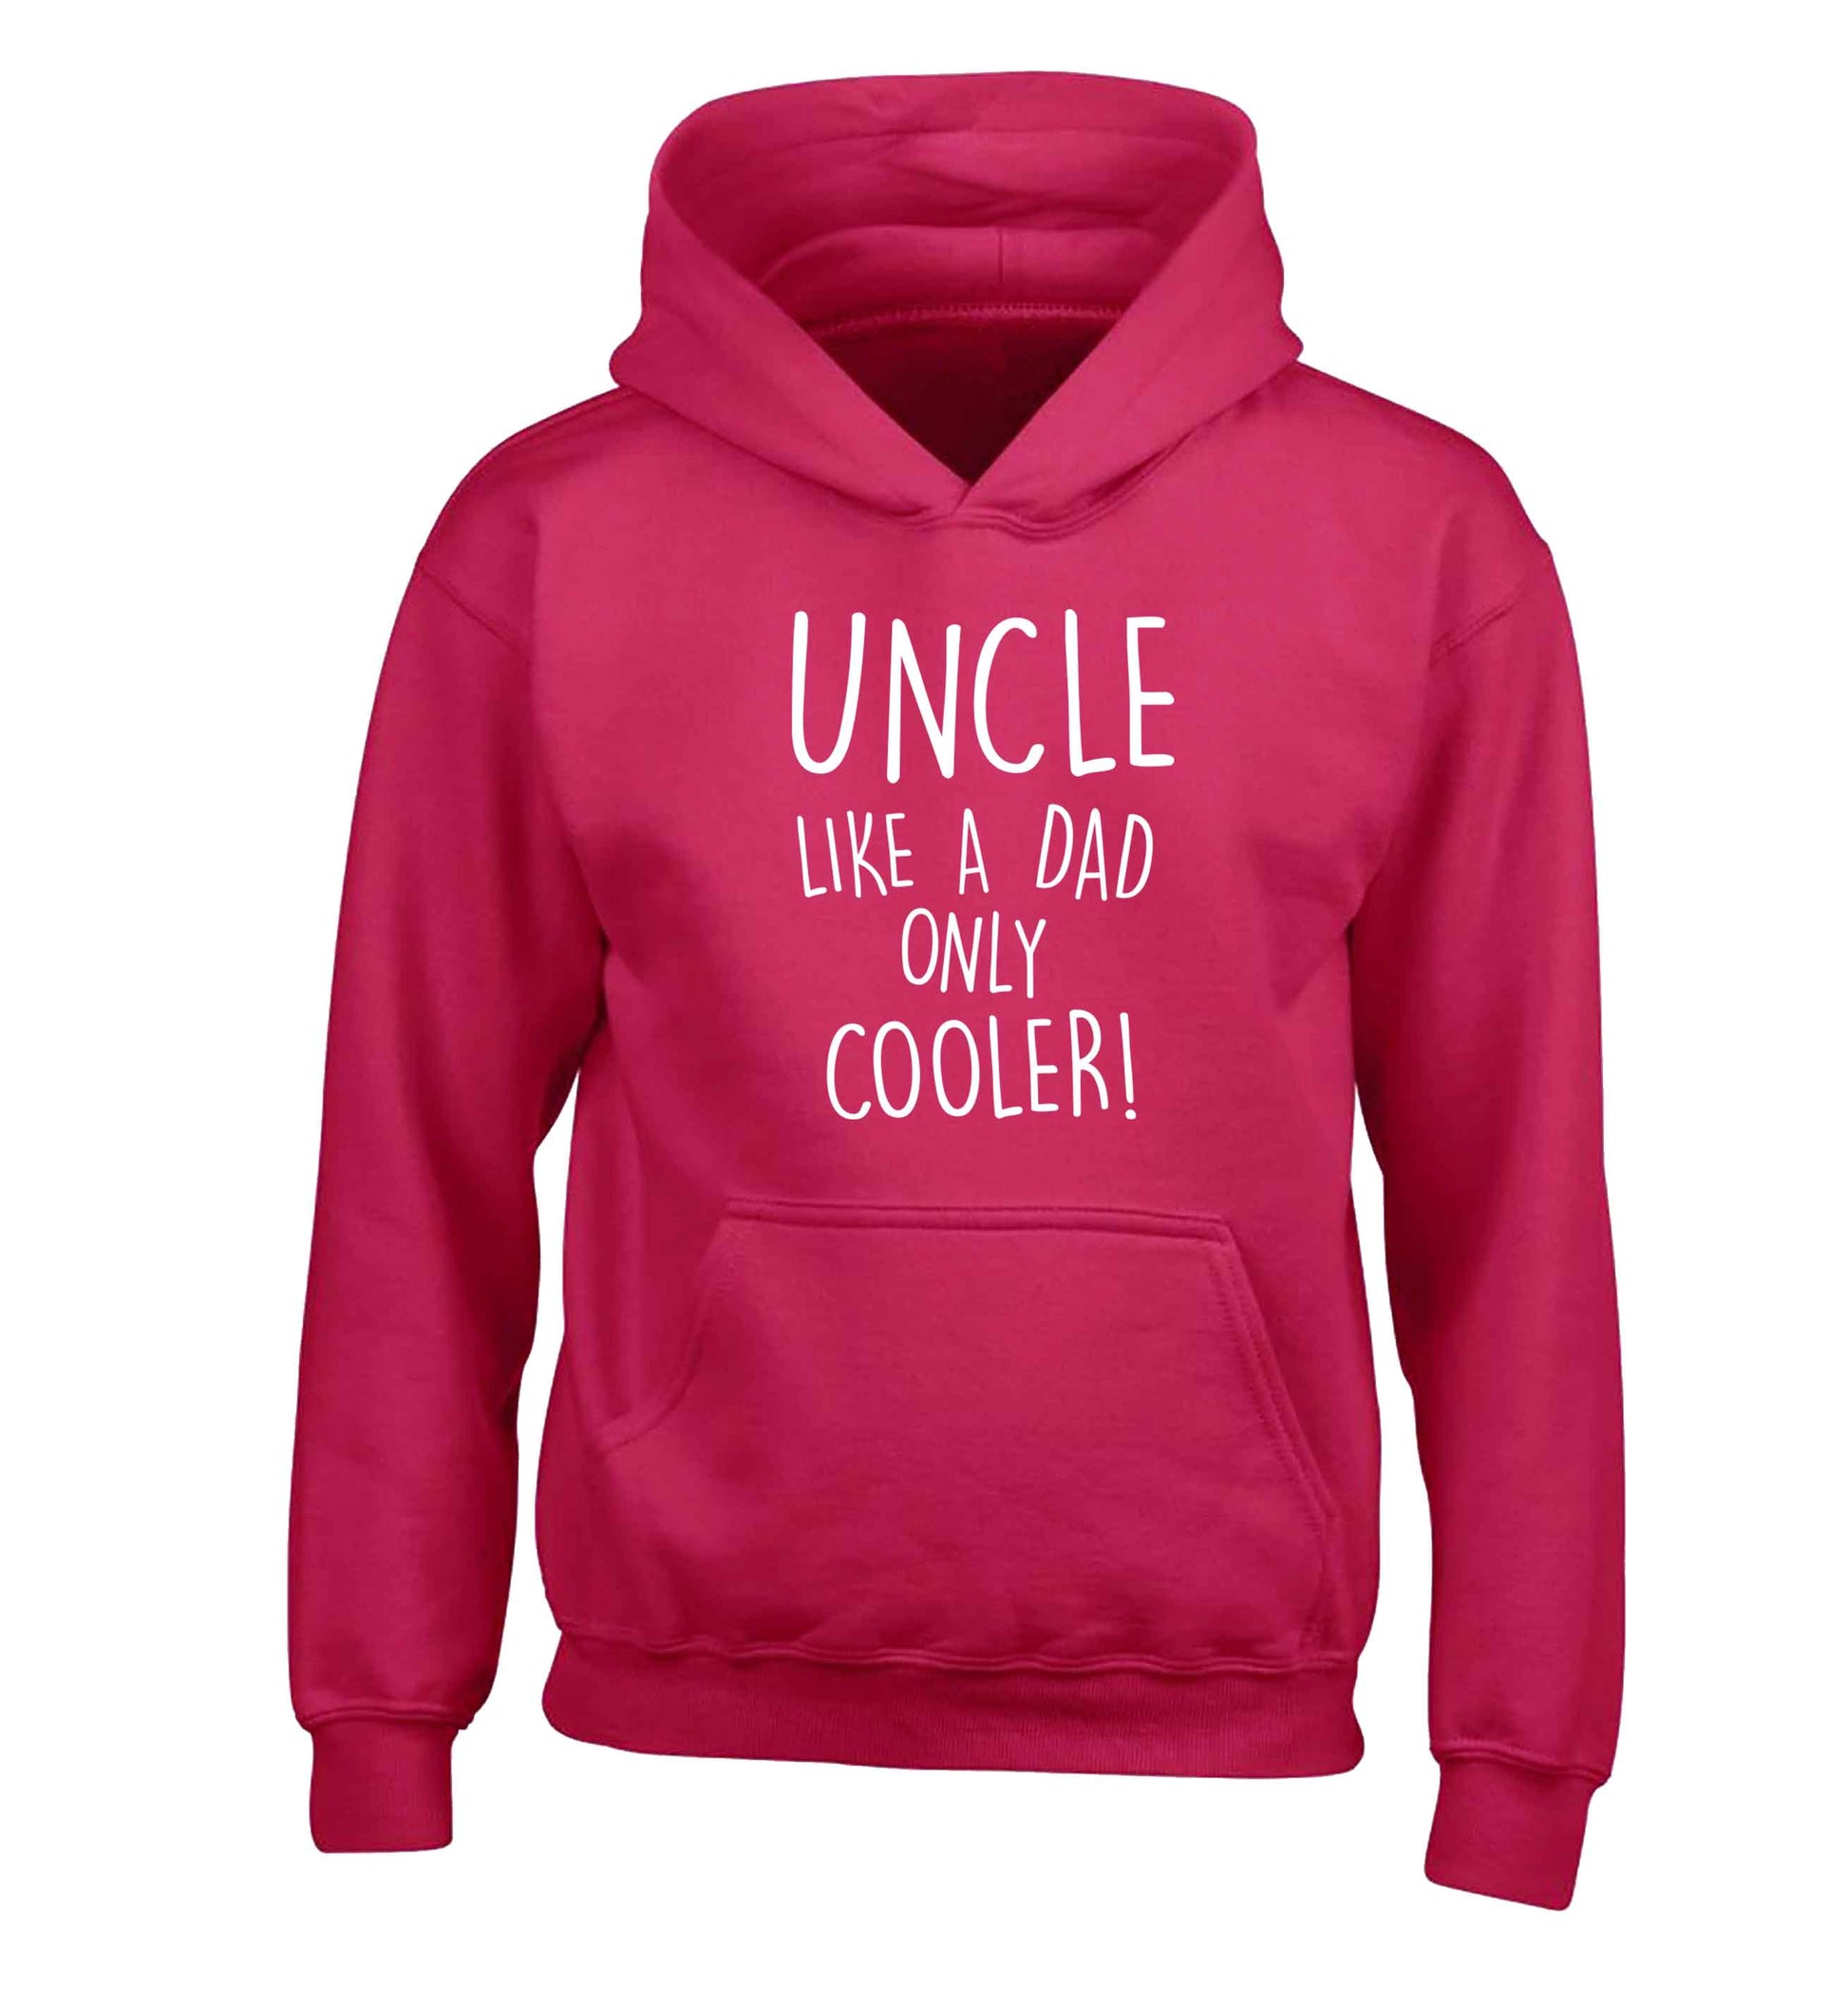 Uncle like a dad only cooler children's pink hoodie 12-13 Years